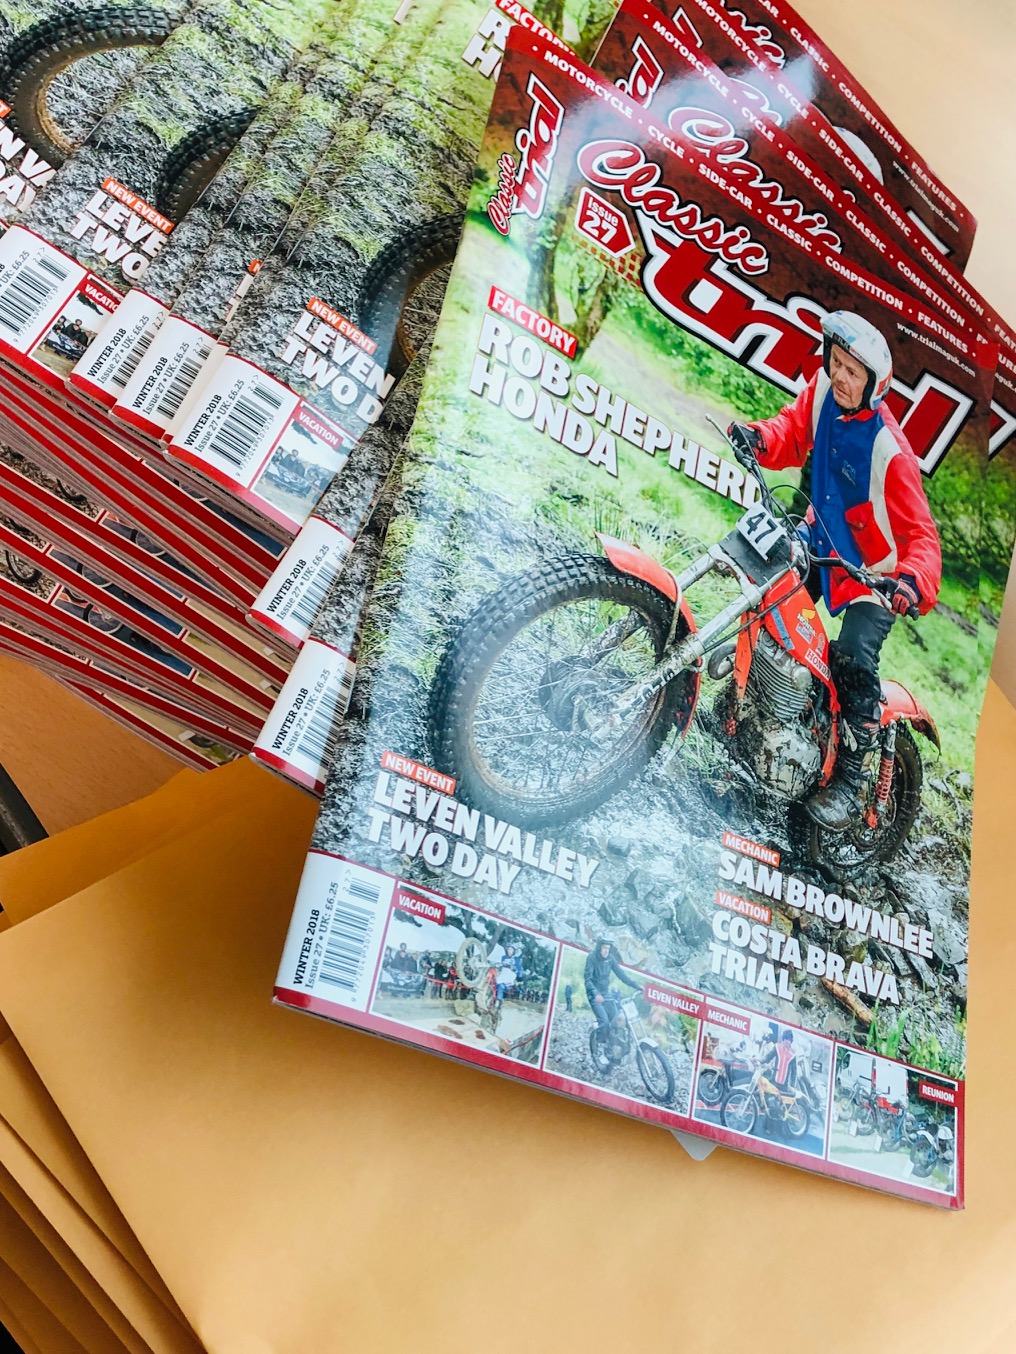 Classic Trial magazine #27 - OUT NOW